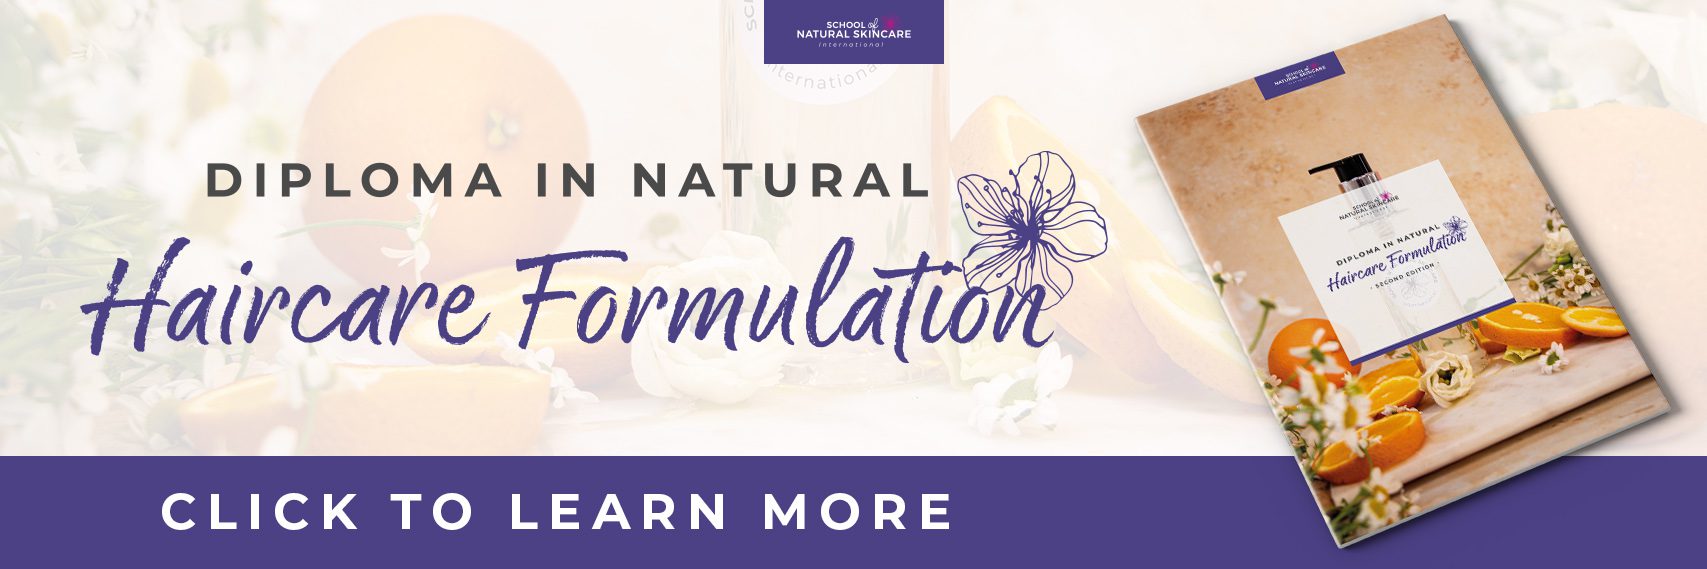 How to Integrate Ayurvedic Principles into your Haircare Formulations Haircare Formulation 